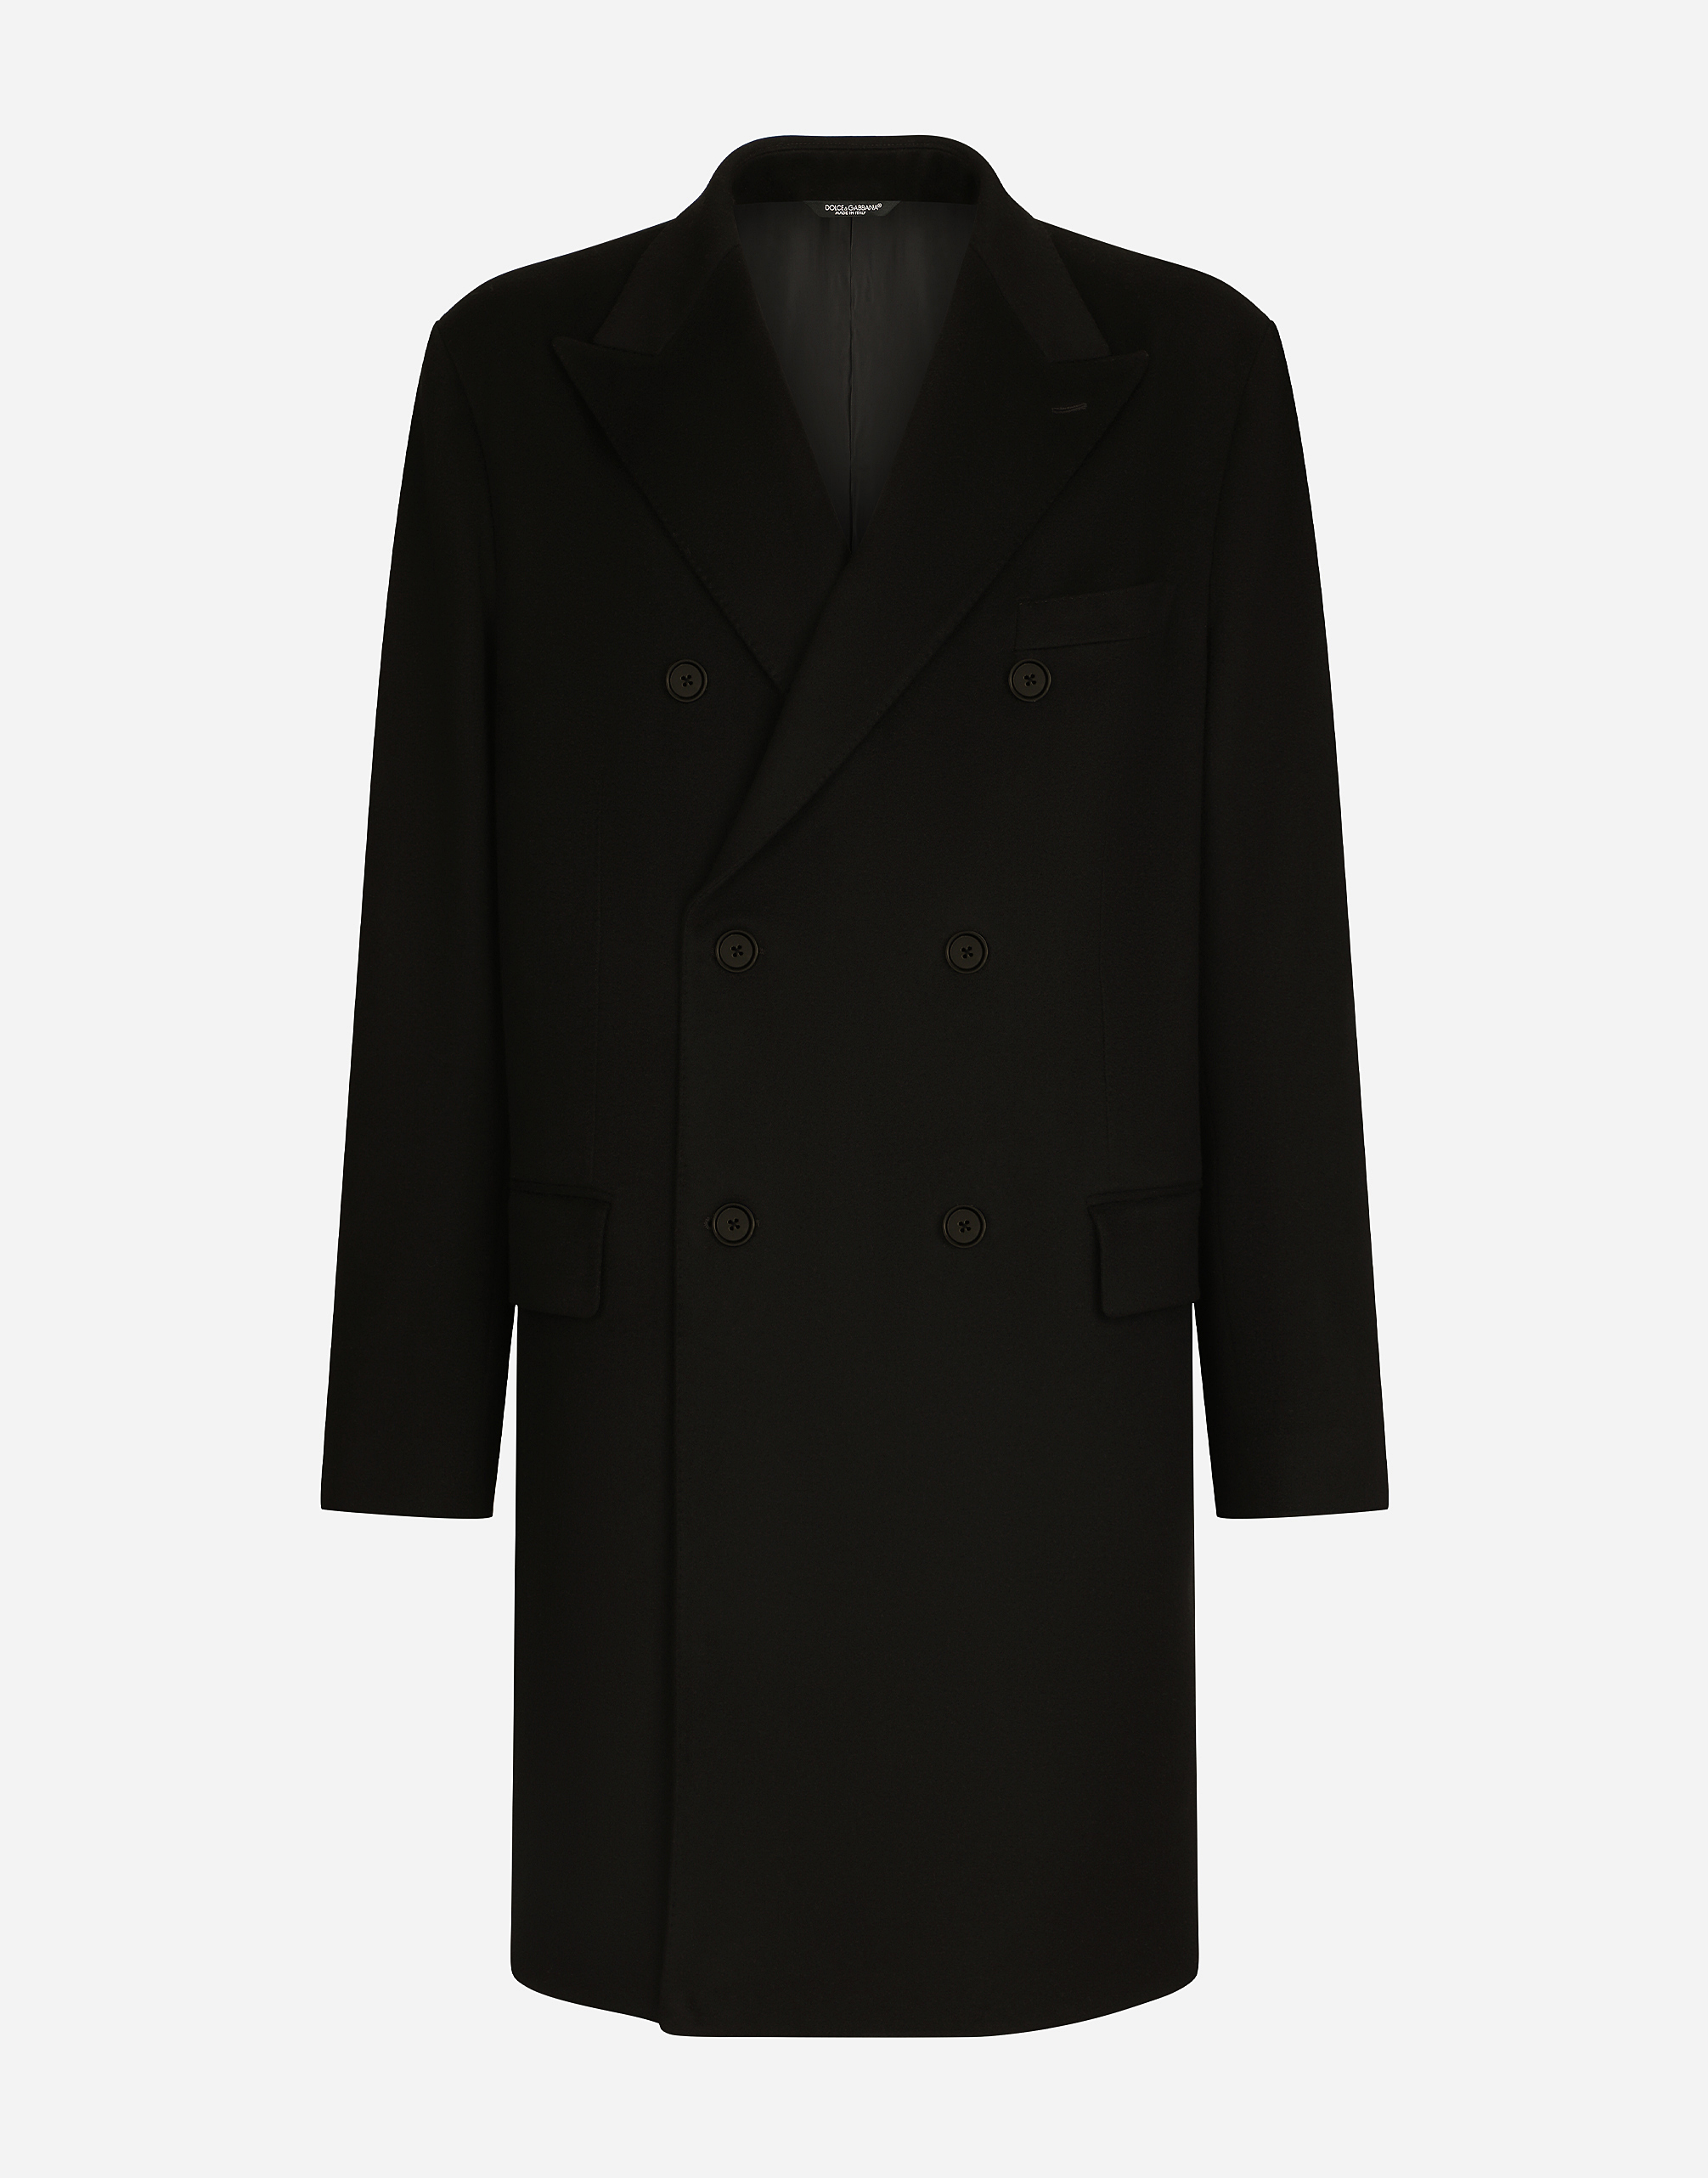 Deconstructed double-breasted wool coat in Black